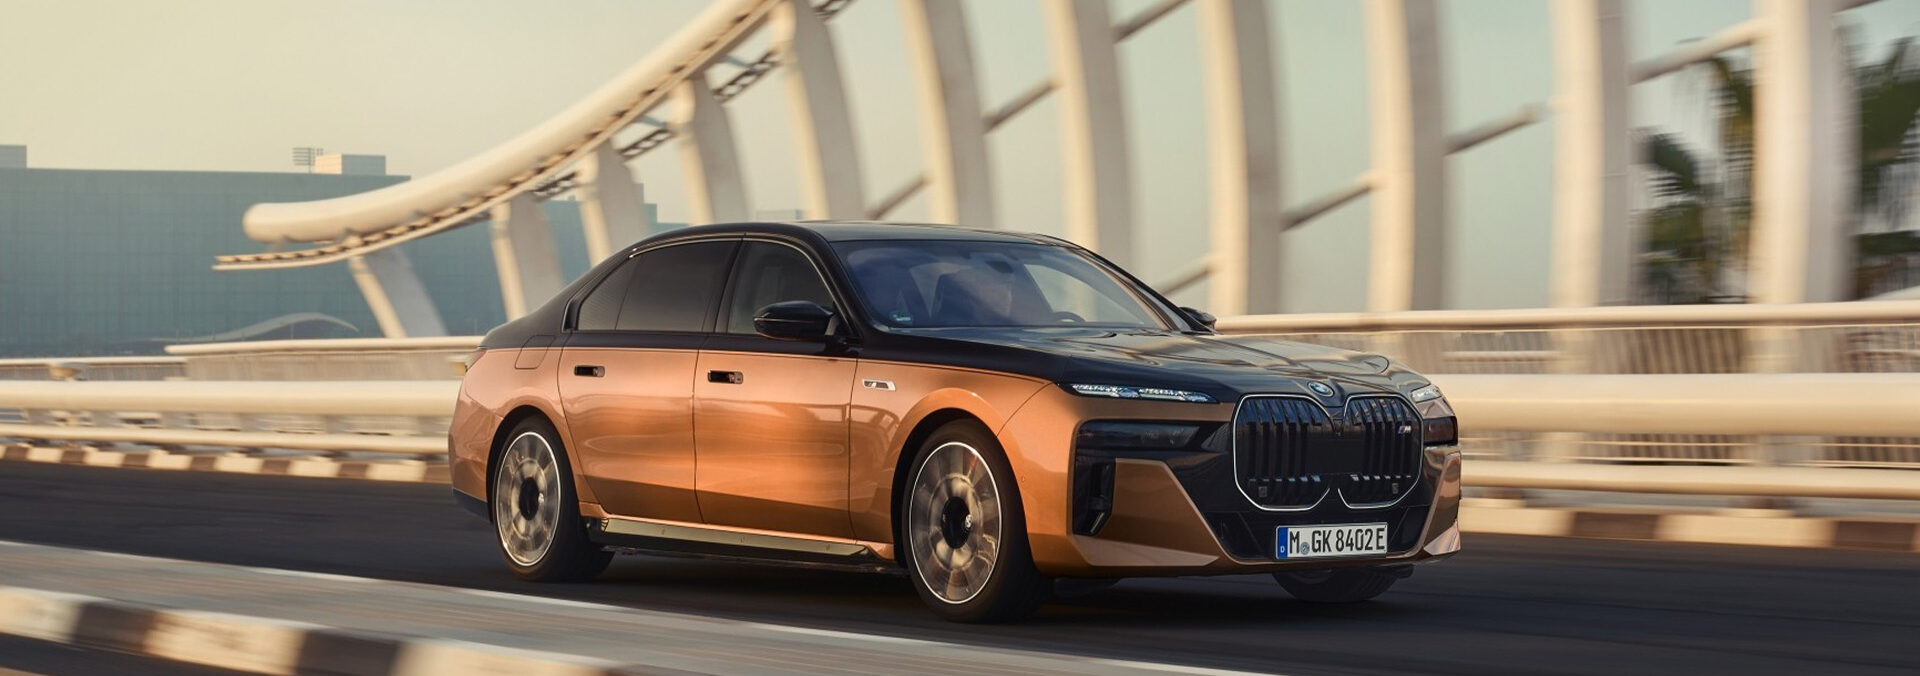 BMW i7 M70 xDrive: The flagship goes fully electric